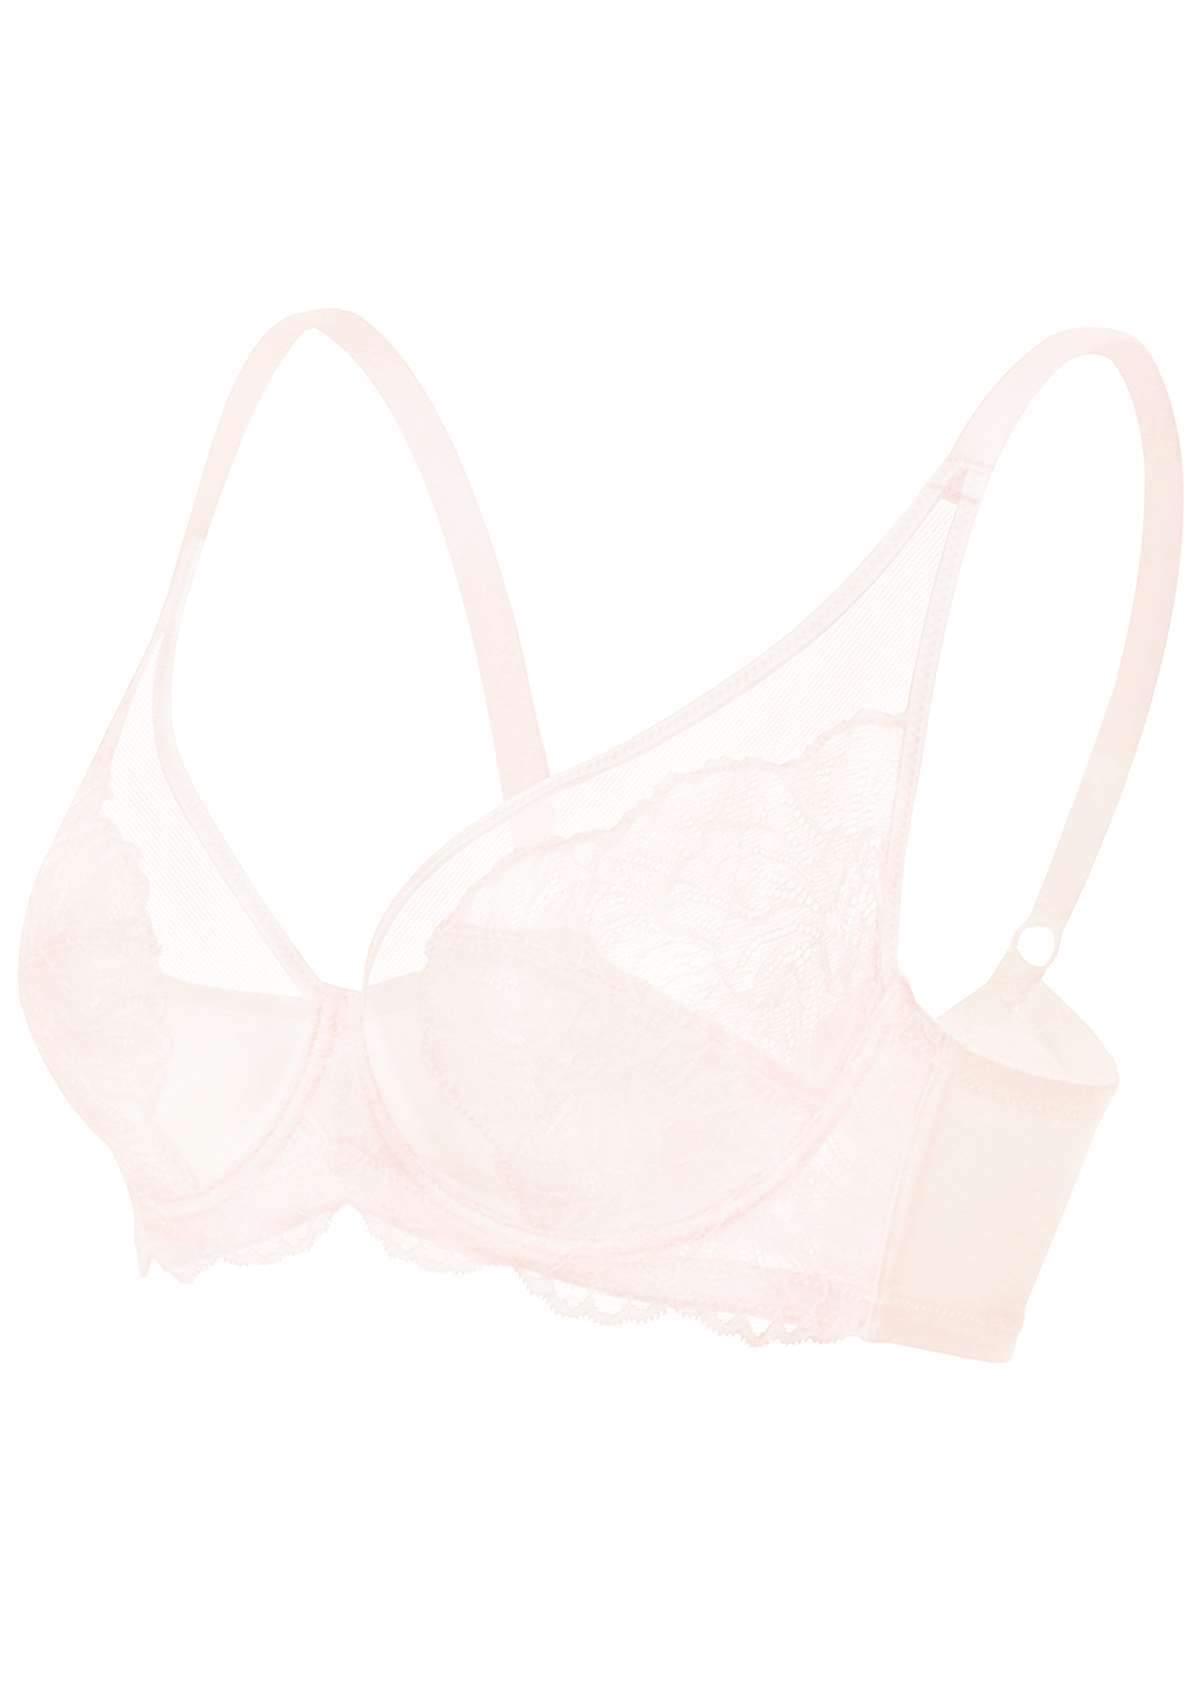 HSIA Blossom Sheer Lace Bra: Comfortable Underwire Bra For Big Busts - Dusty Peach / 40 / D